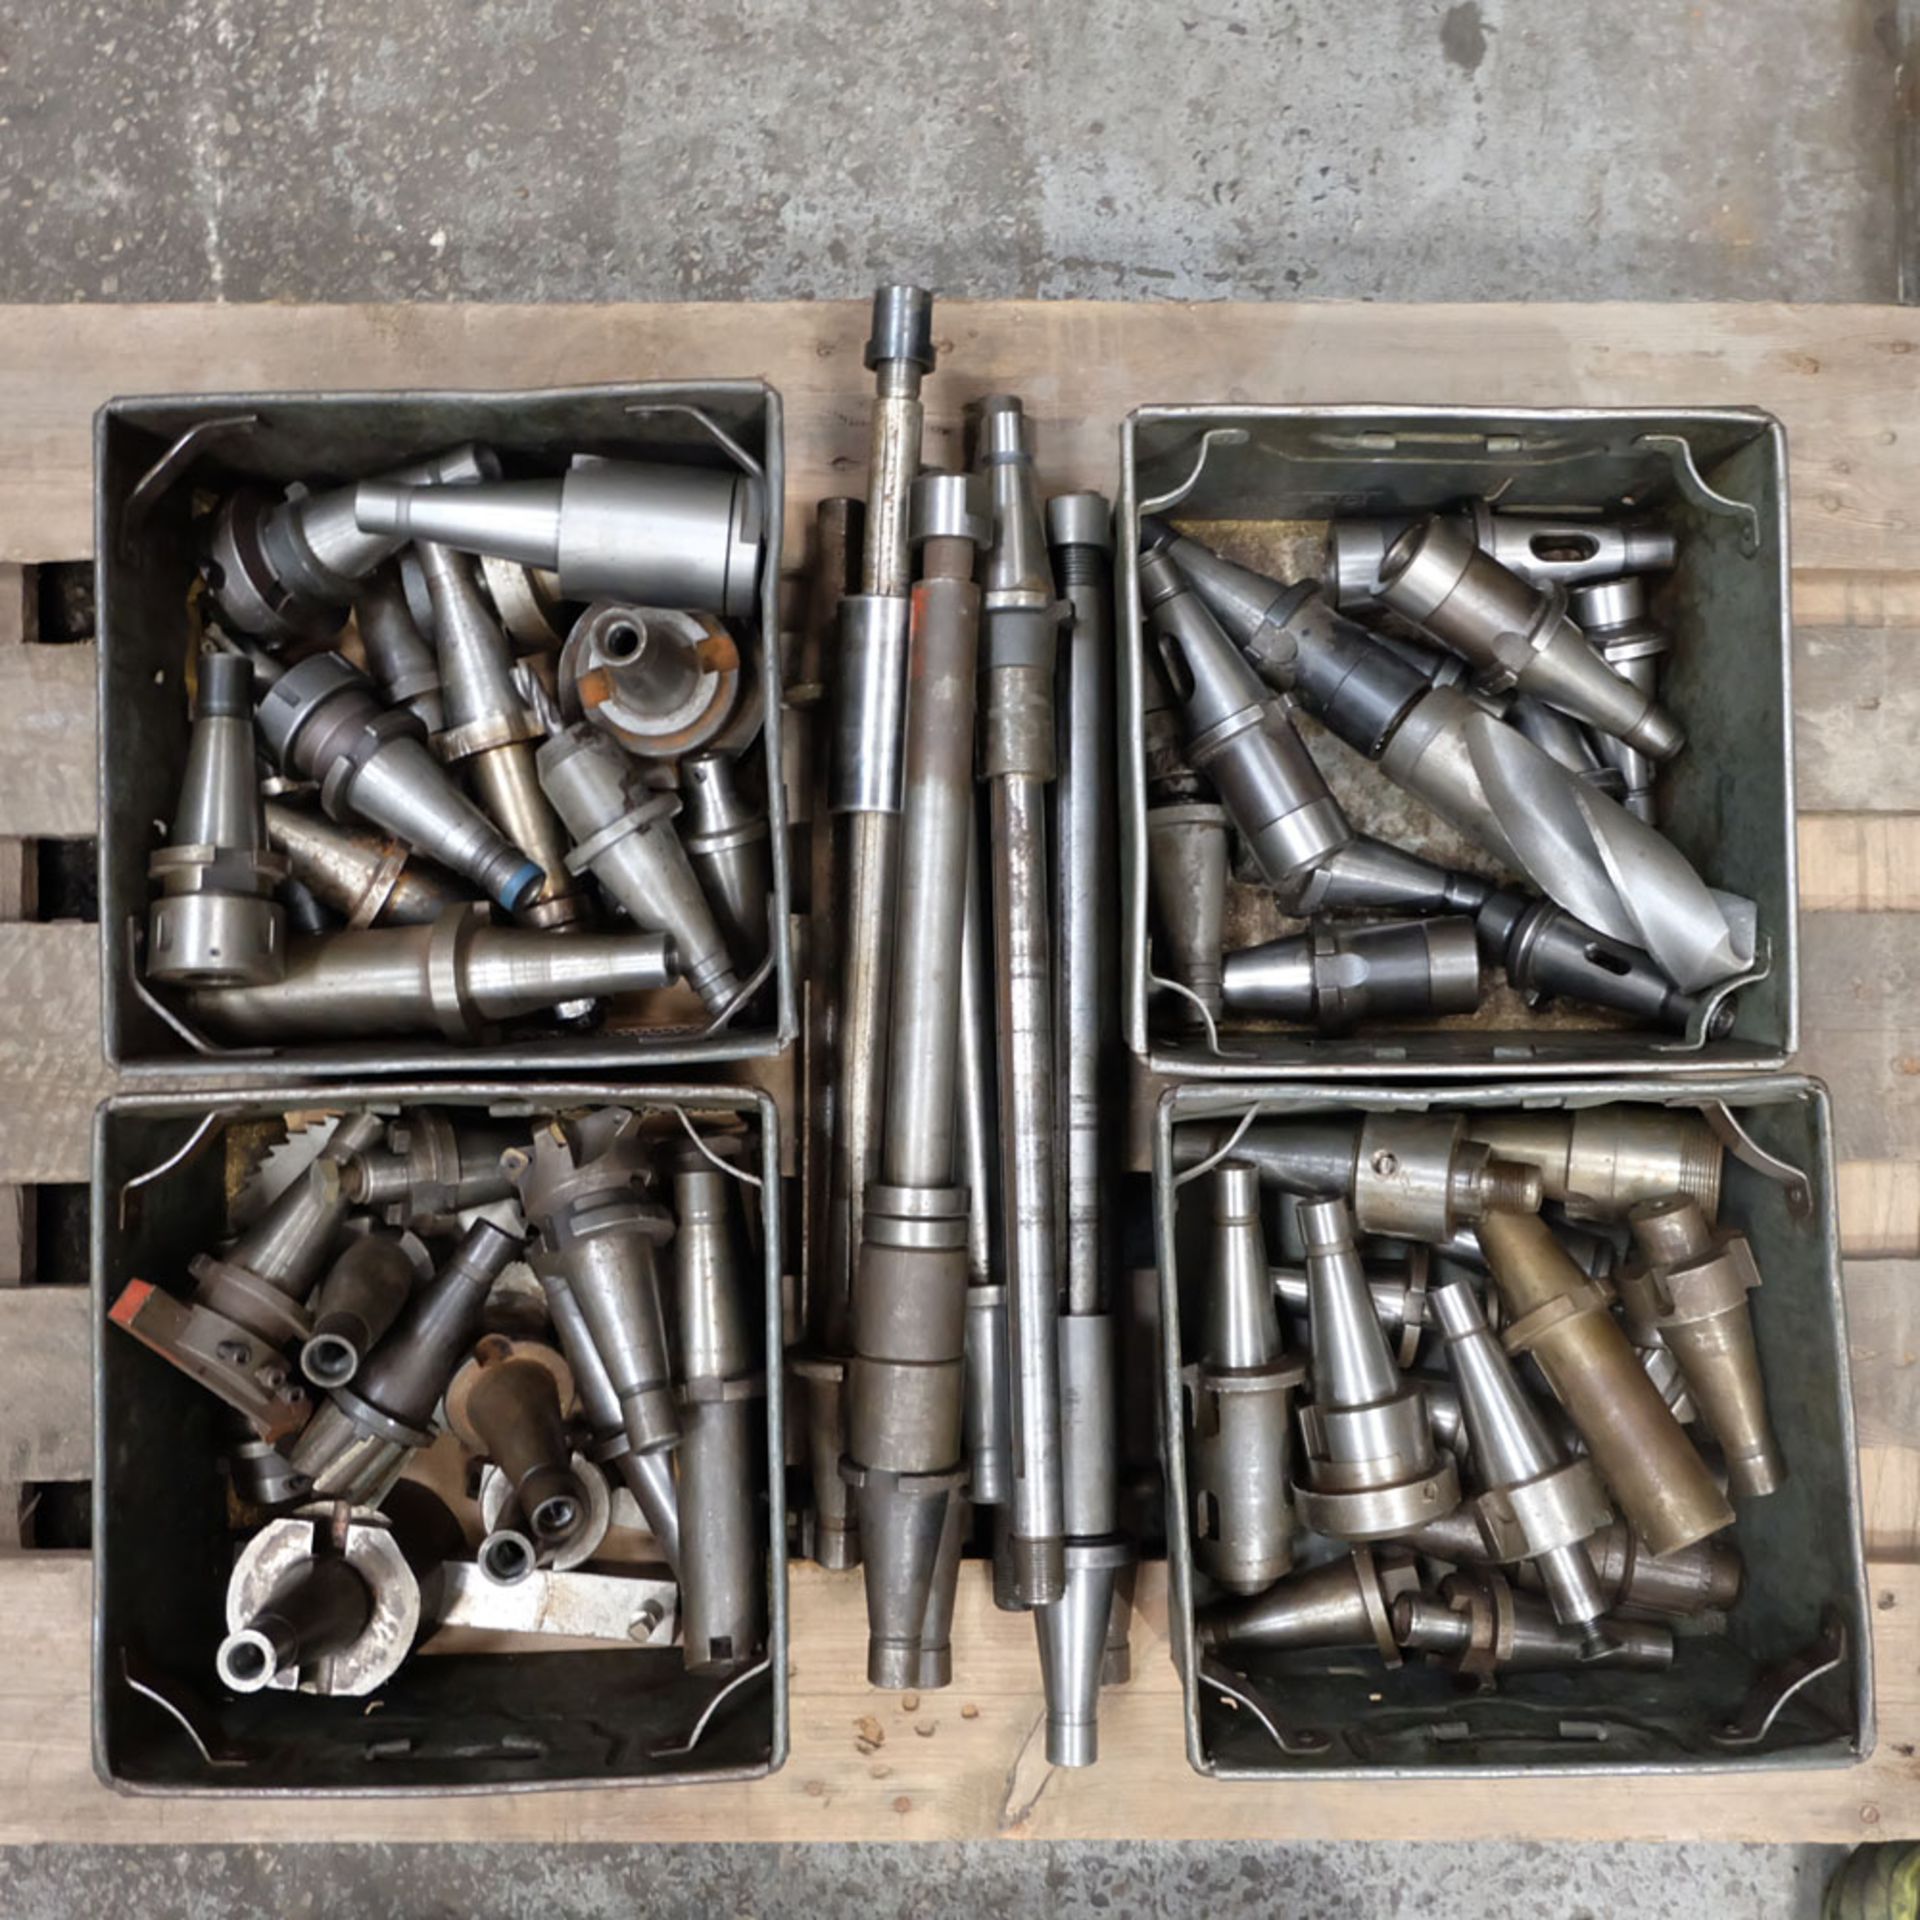 Quantity of 40 ISO Spindle Tooling